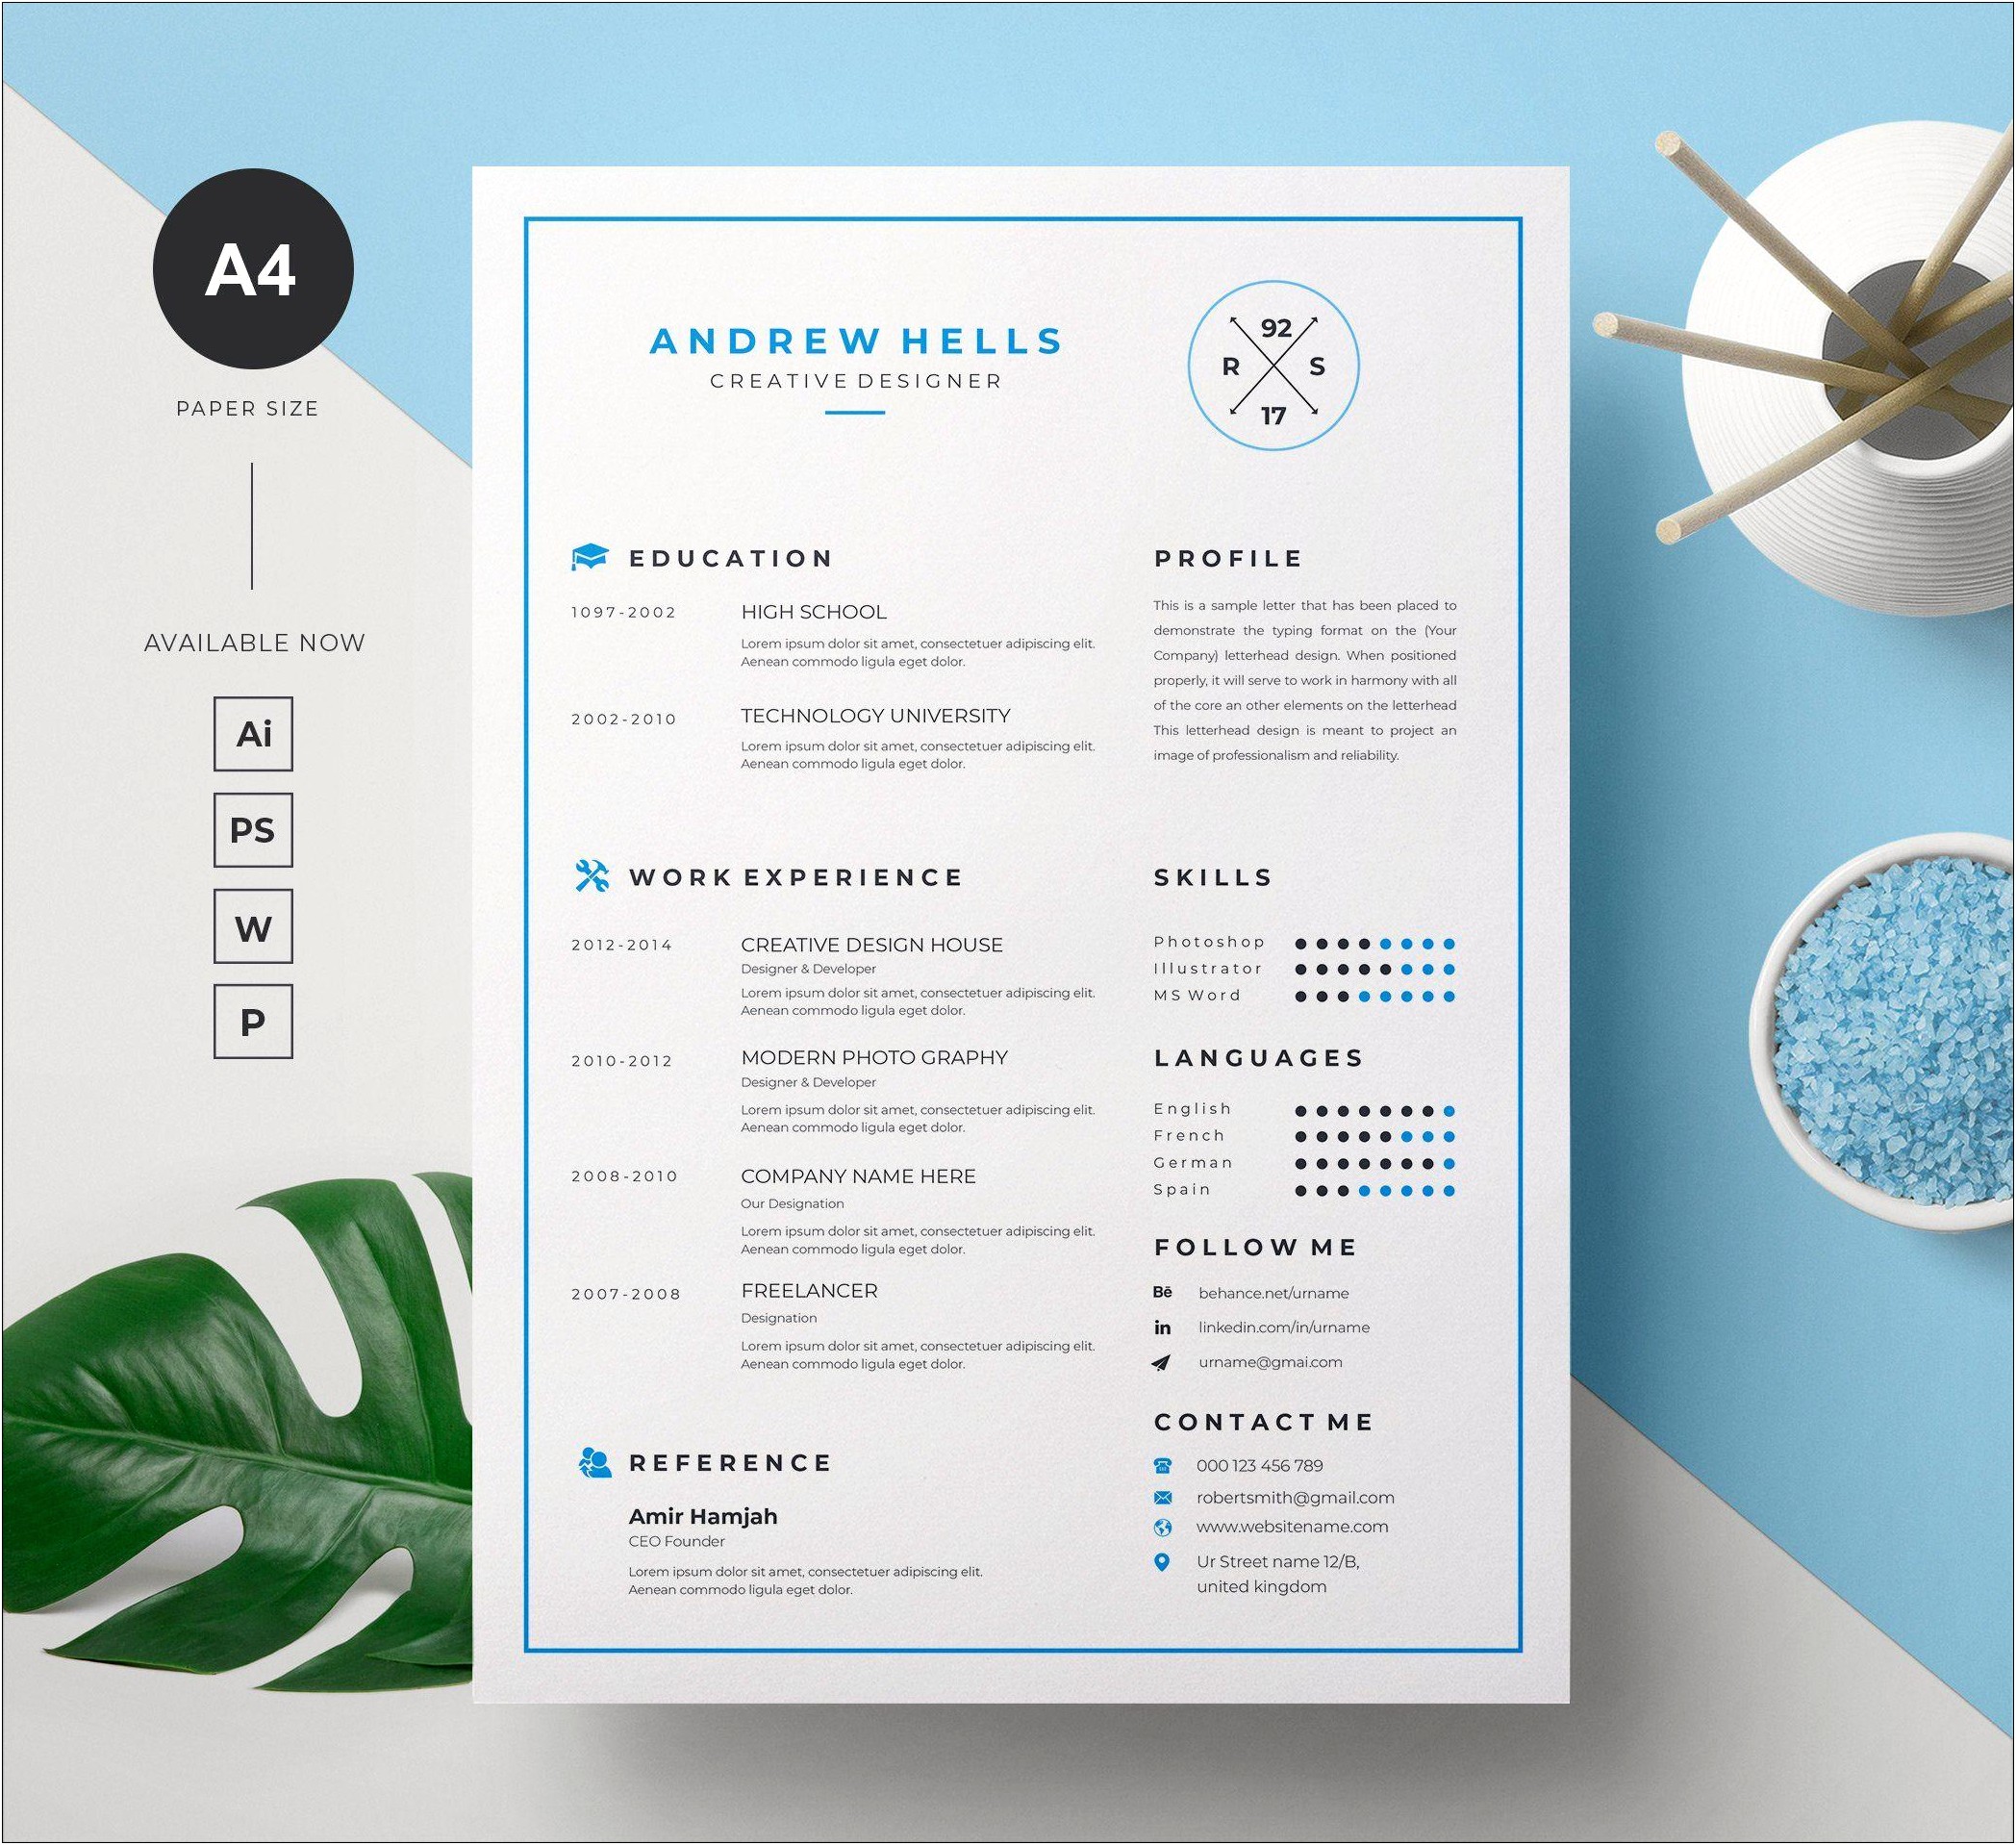 Illustrator Resume And Cover Letter Template